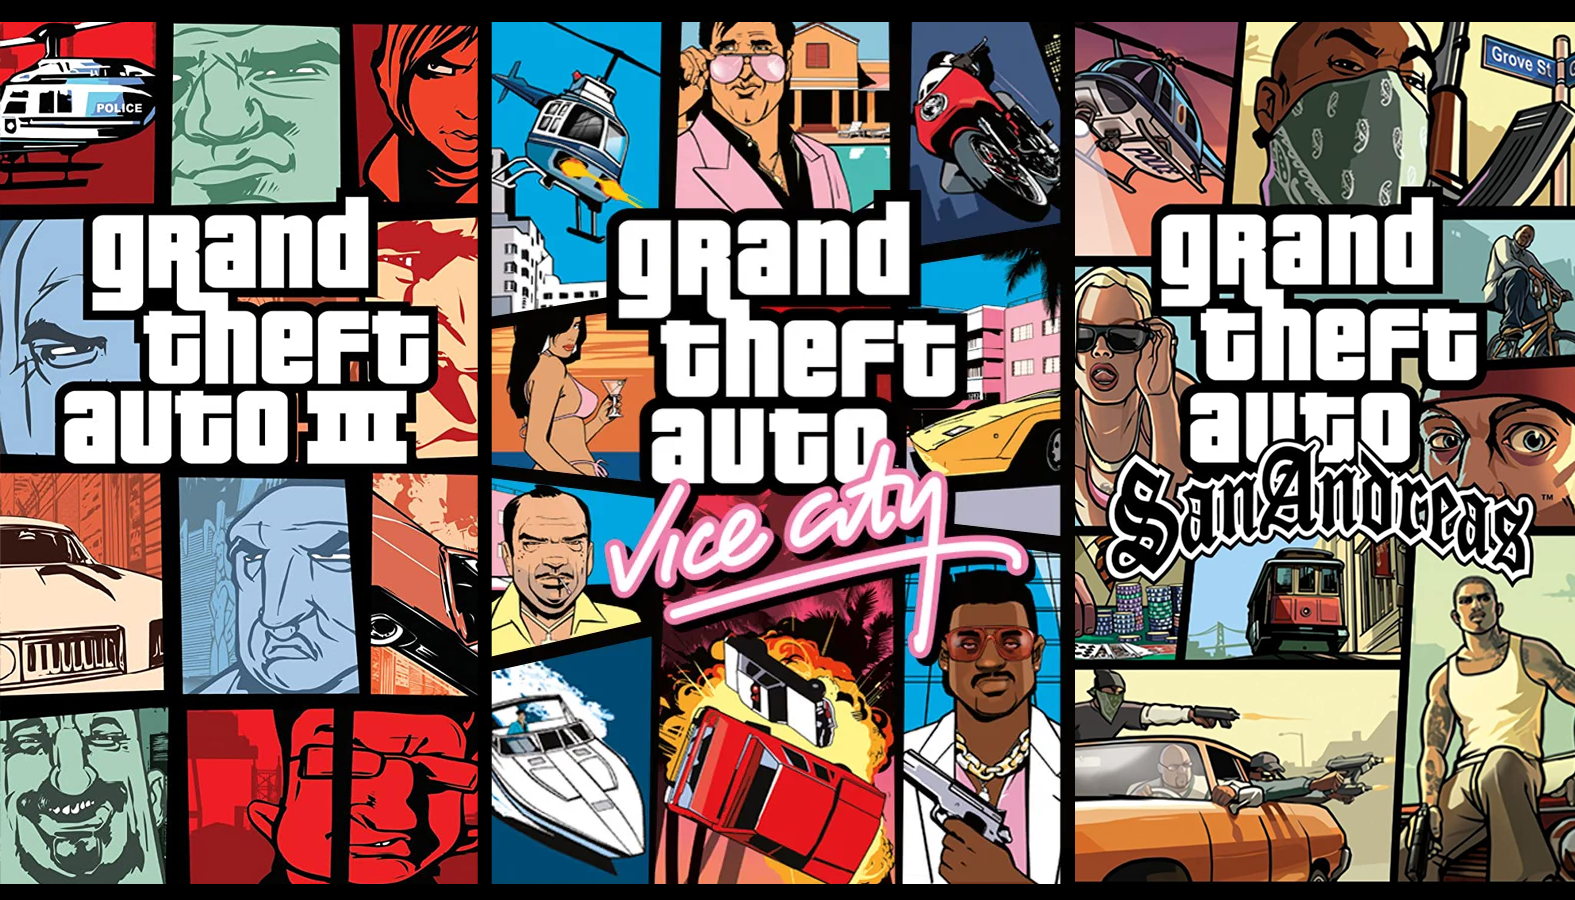 GTA 3, San Andreas, and Vice City Remasters to Launch Later This